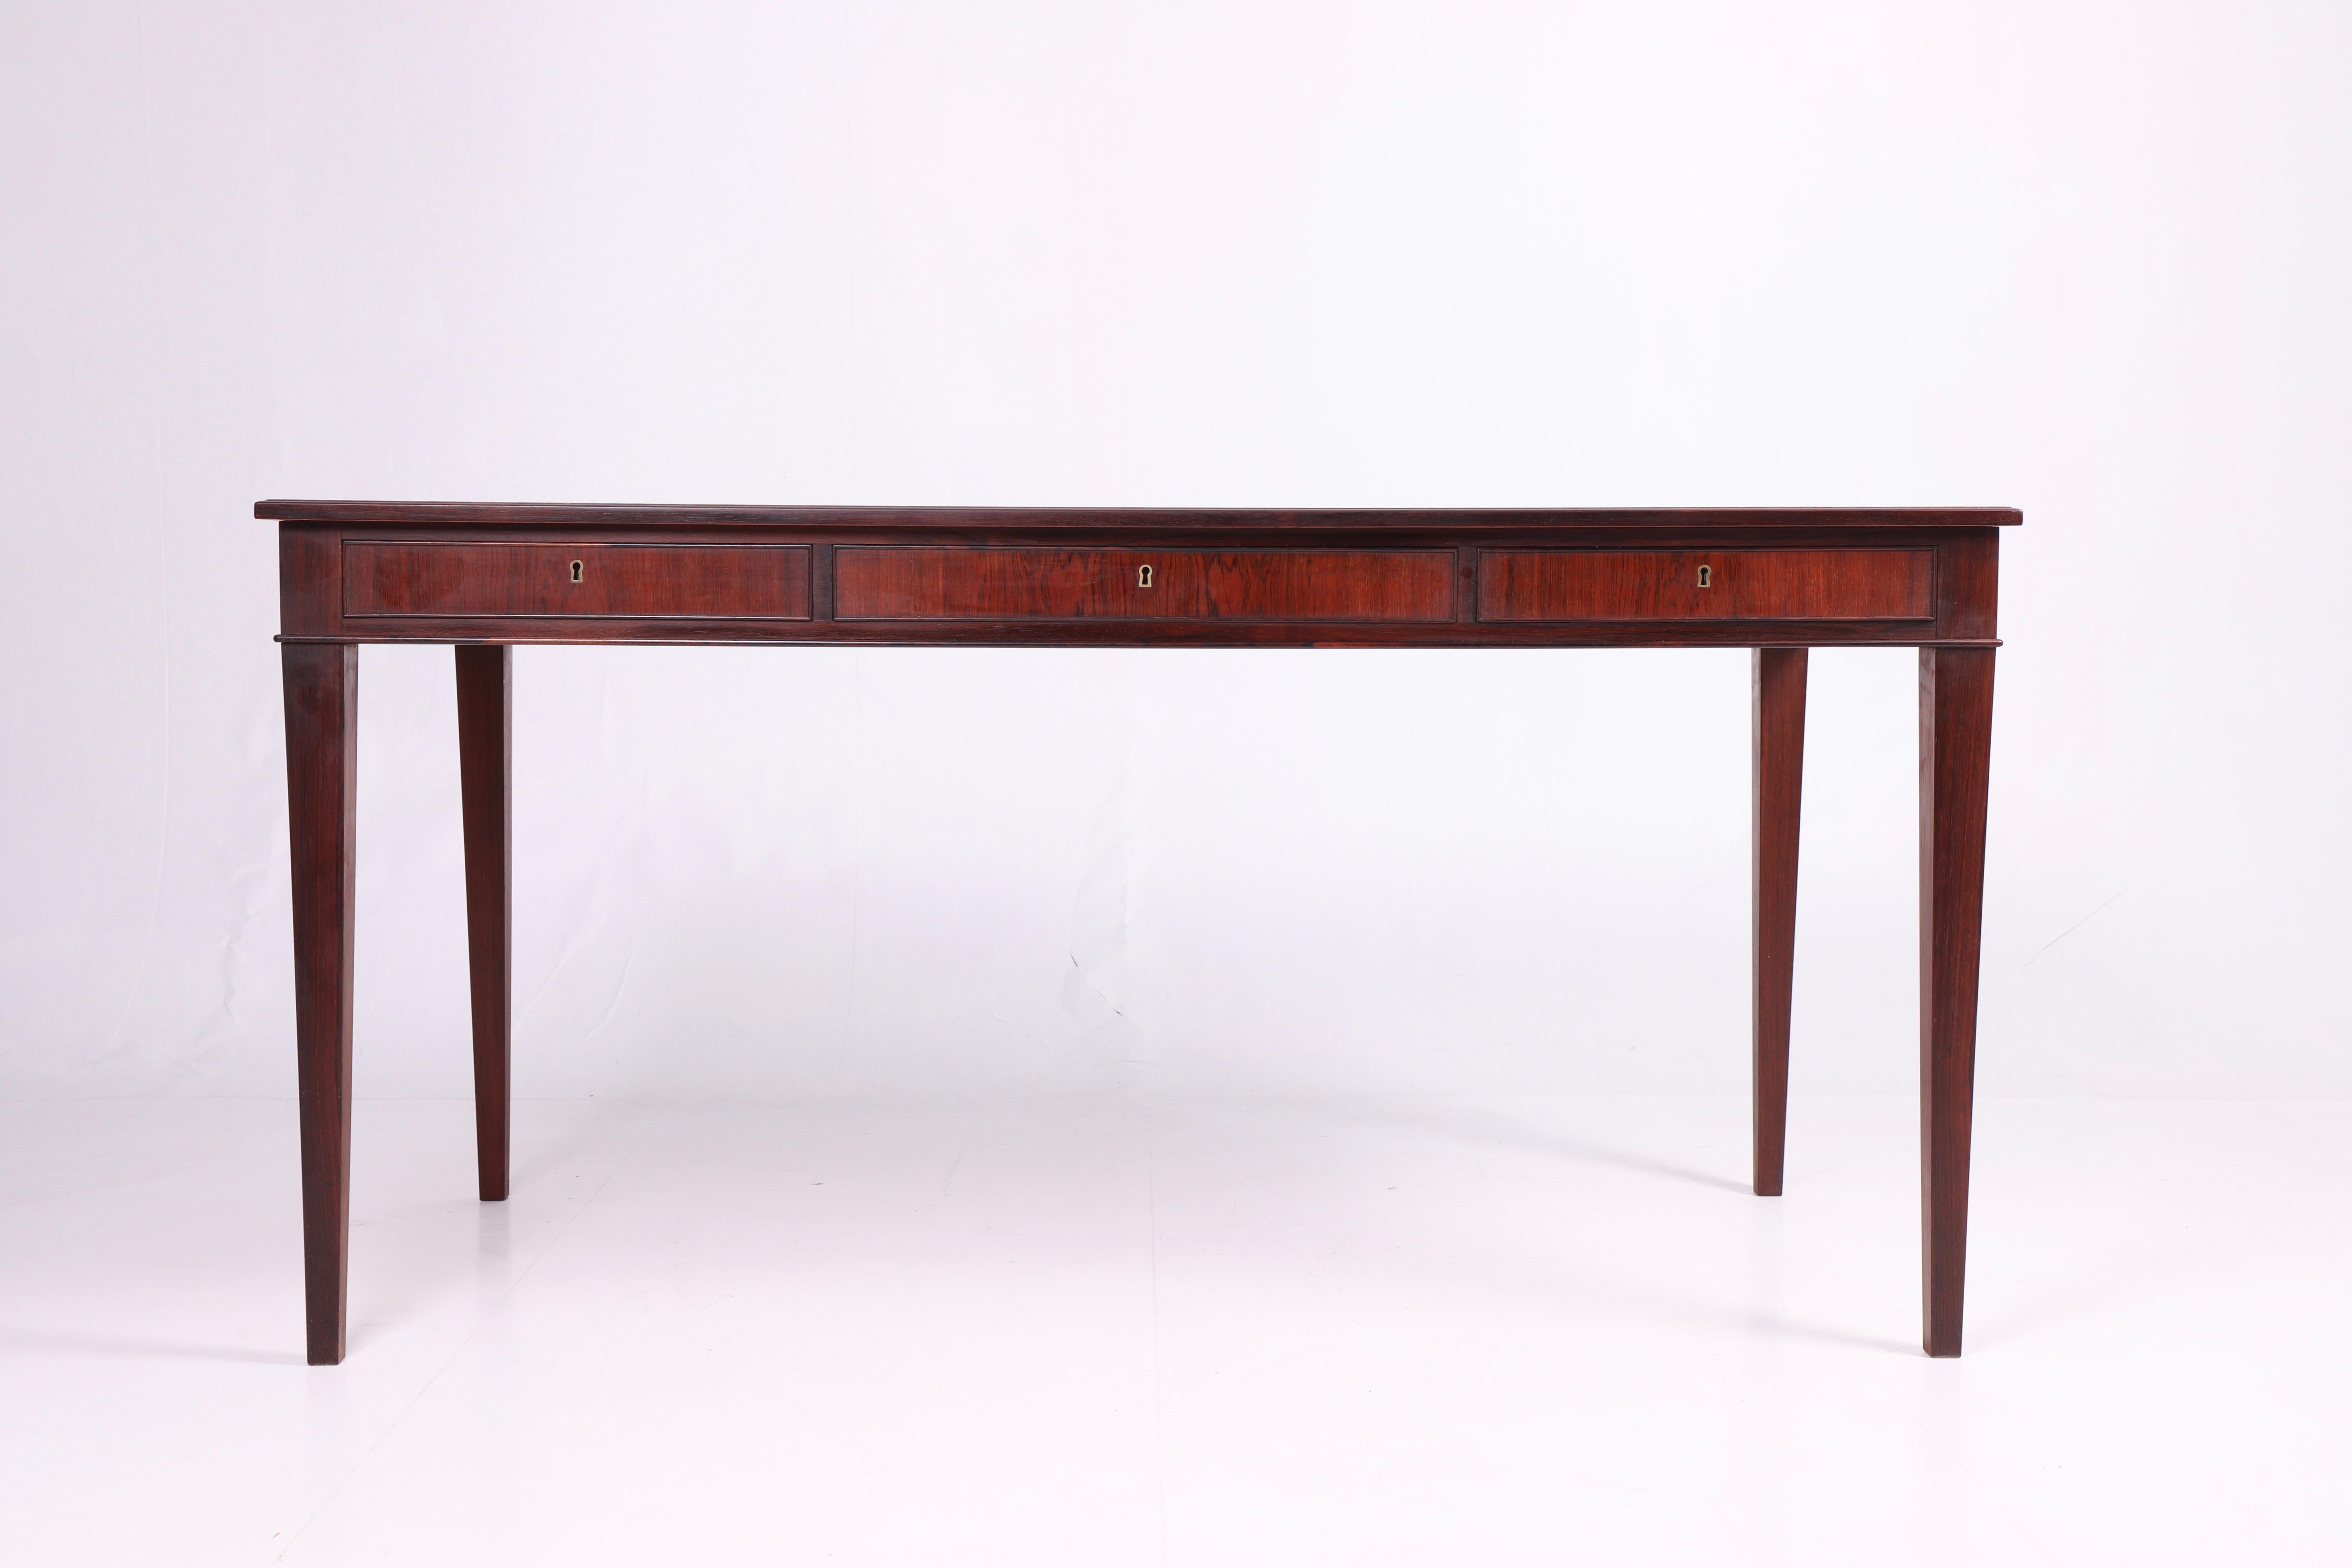 Freestanding desk in rosewood with three drawers, designed and made by cabinetmaker Frits Henningsen. Made in Denmark, great original condition.